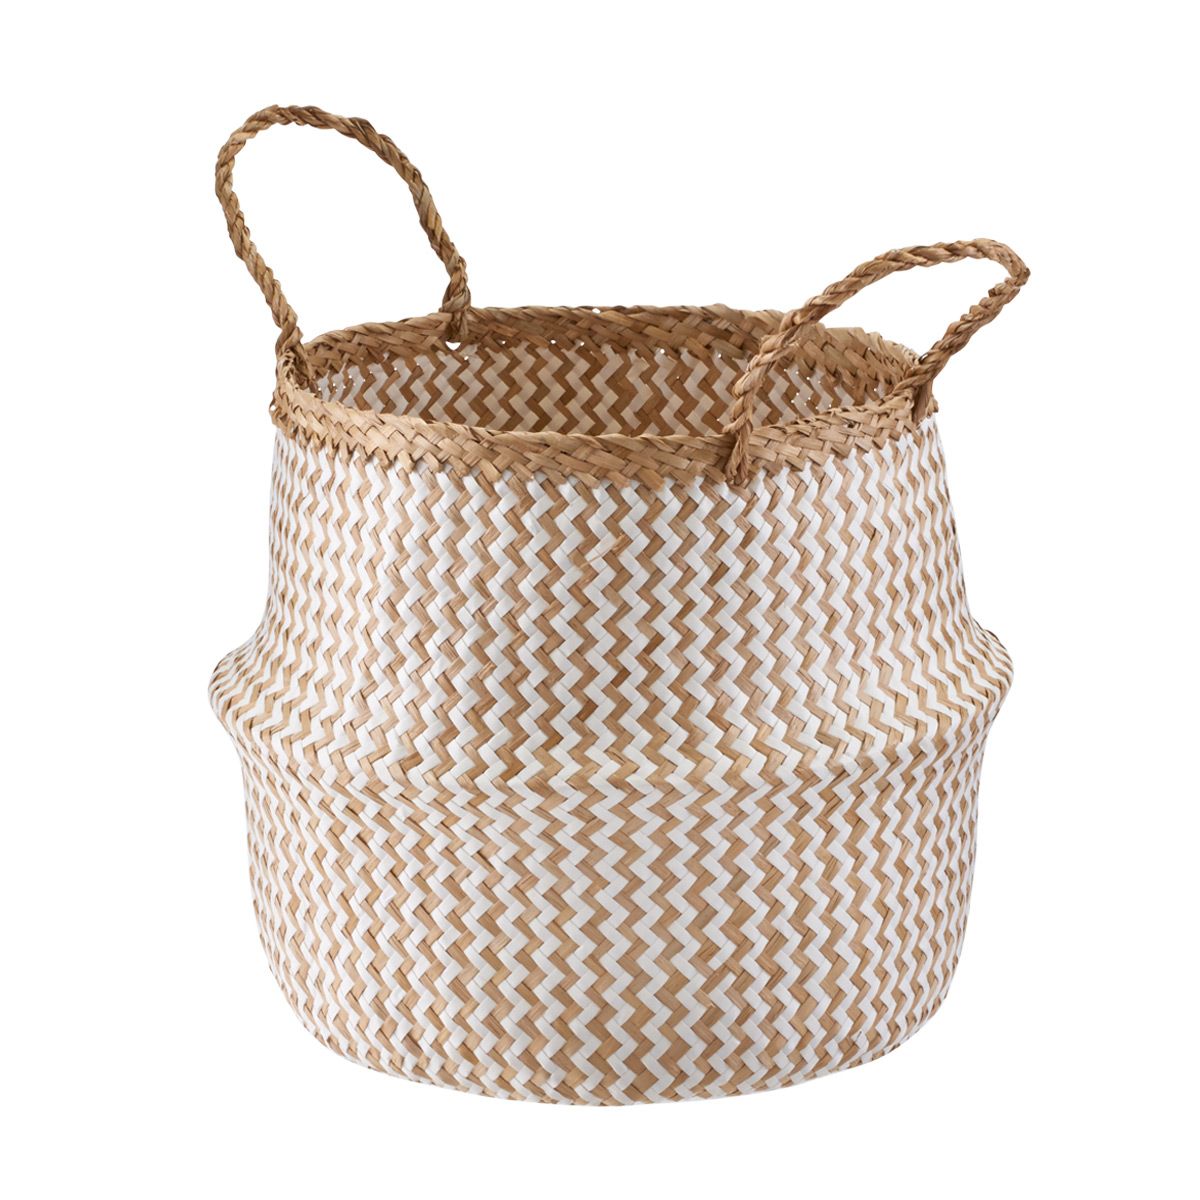 Seagrass Belly Basket Chevron | The Container Store